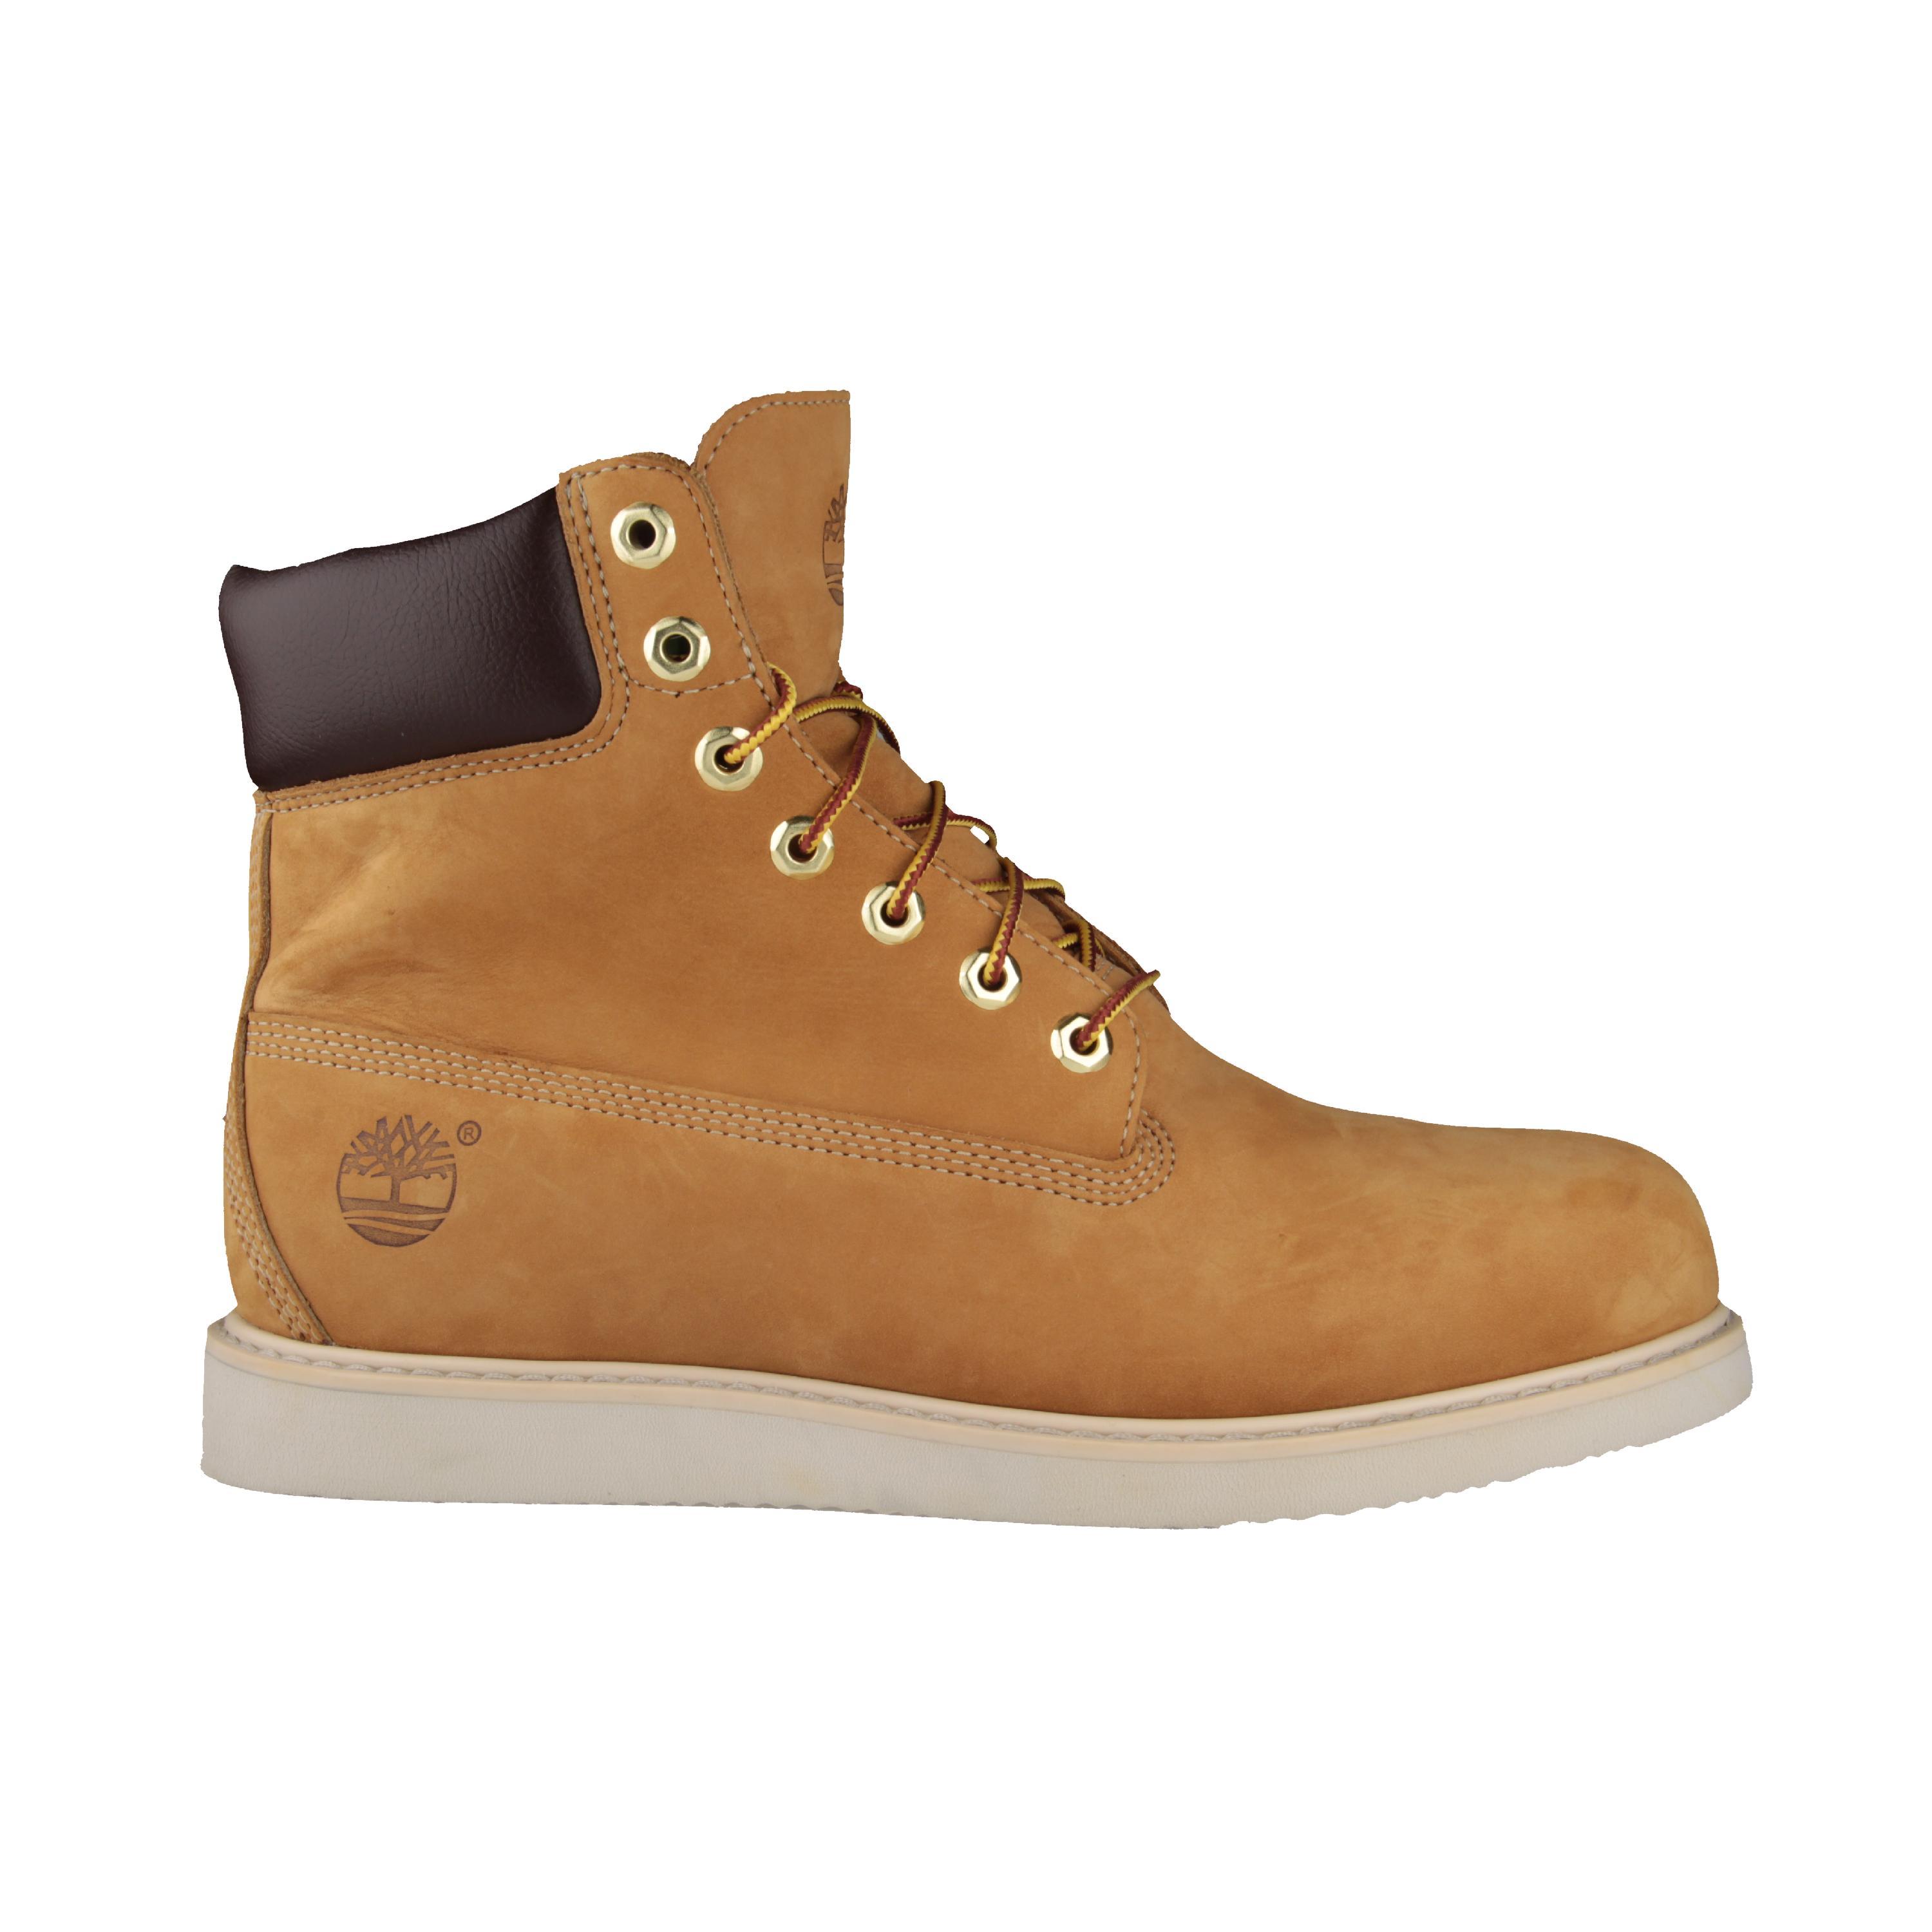 Foto Timberland 6inch Boot Wedge foto 22177